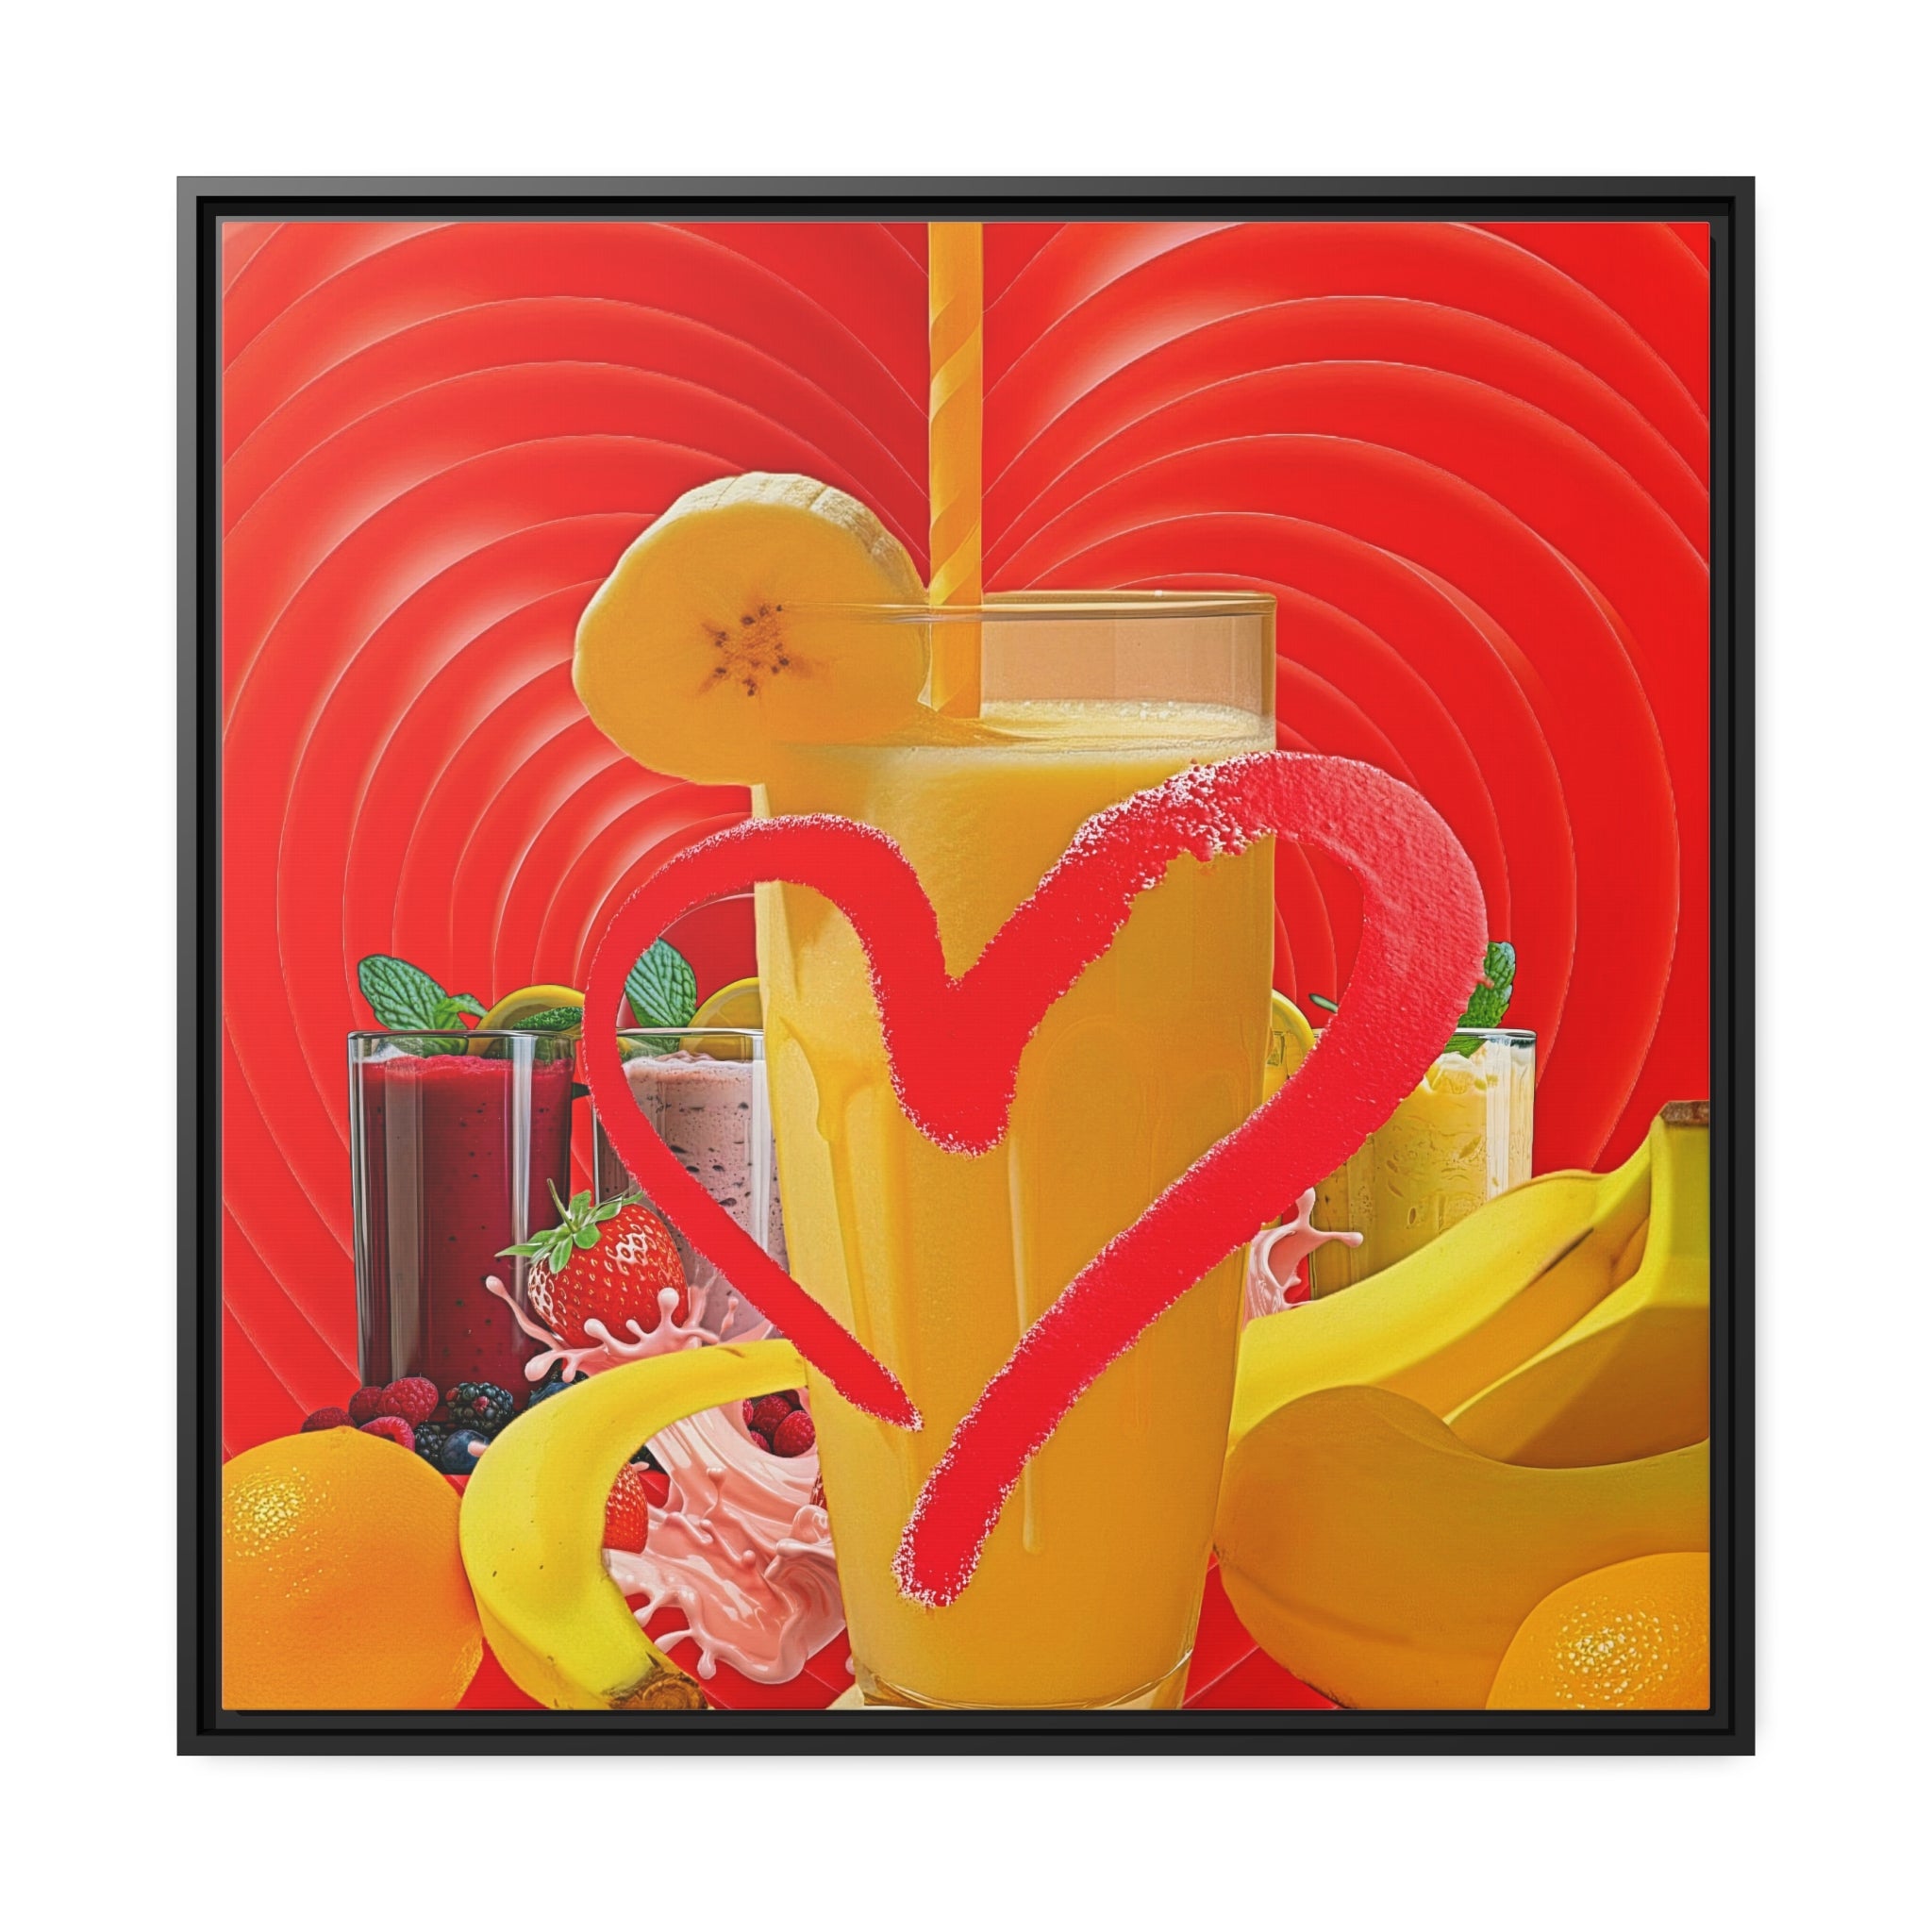 Wall Art LOVE SMOOTHIES Canvas Print Painting Original Giclee 32X32 + Frame Love Nice Beauty Fun Design Fit Hot House Home Office Gift Ready Hang Living